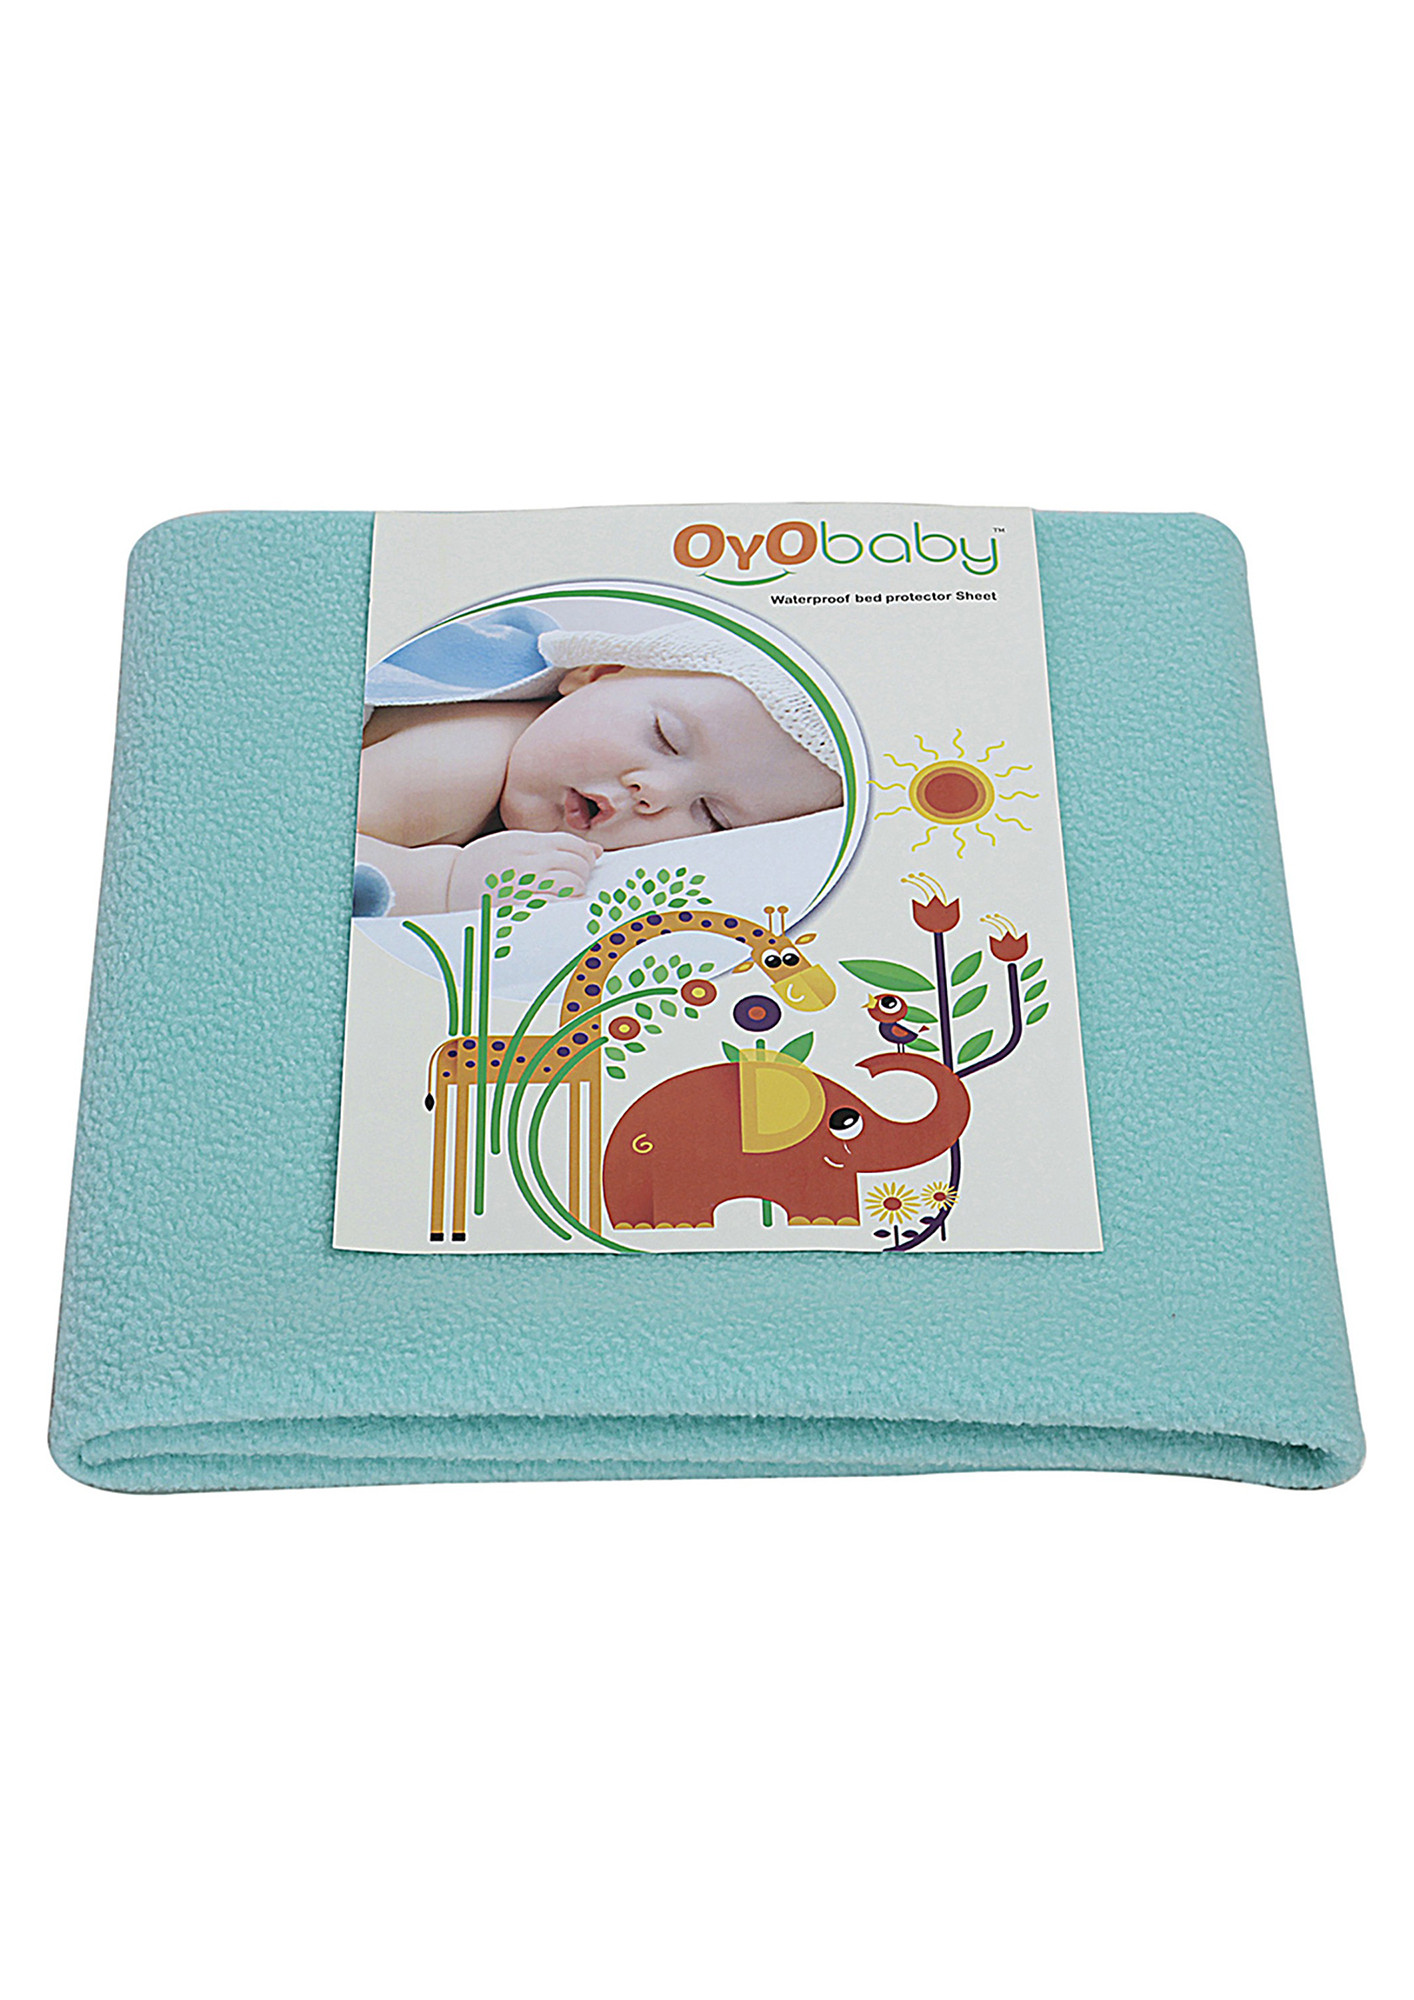 Oyo Baby Cotton Baby Bed Protecting Mat (Sea Green, Large)-OB-2022-SG